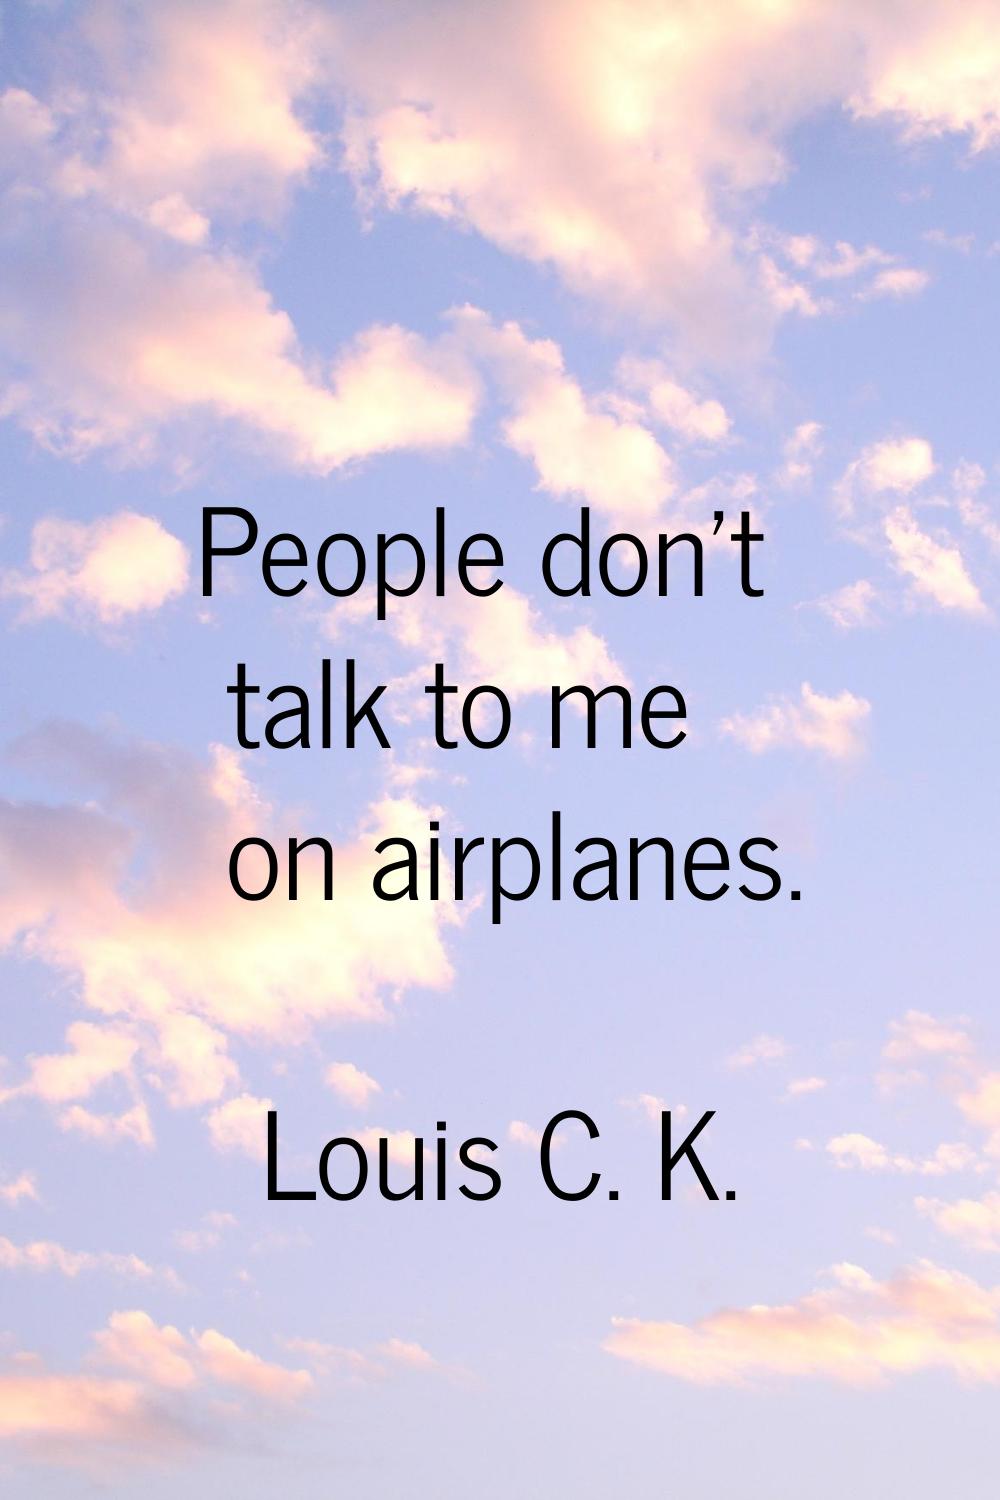 People don't talk to me on airplanes.